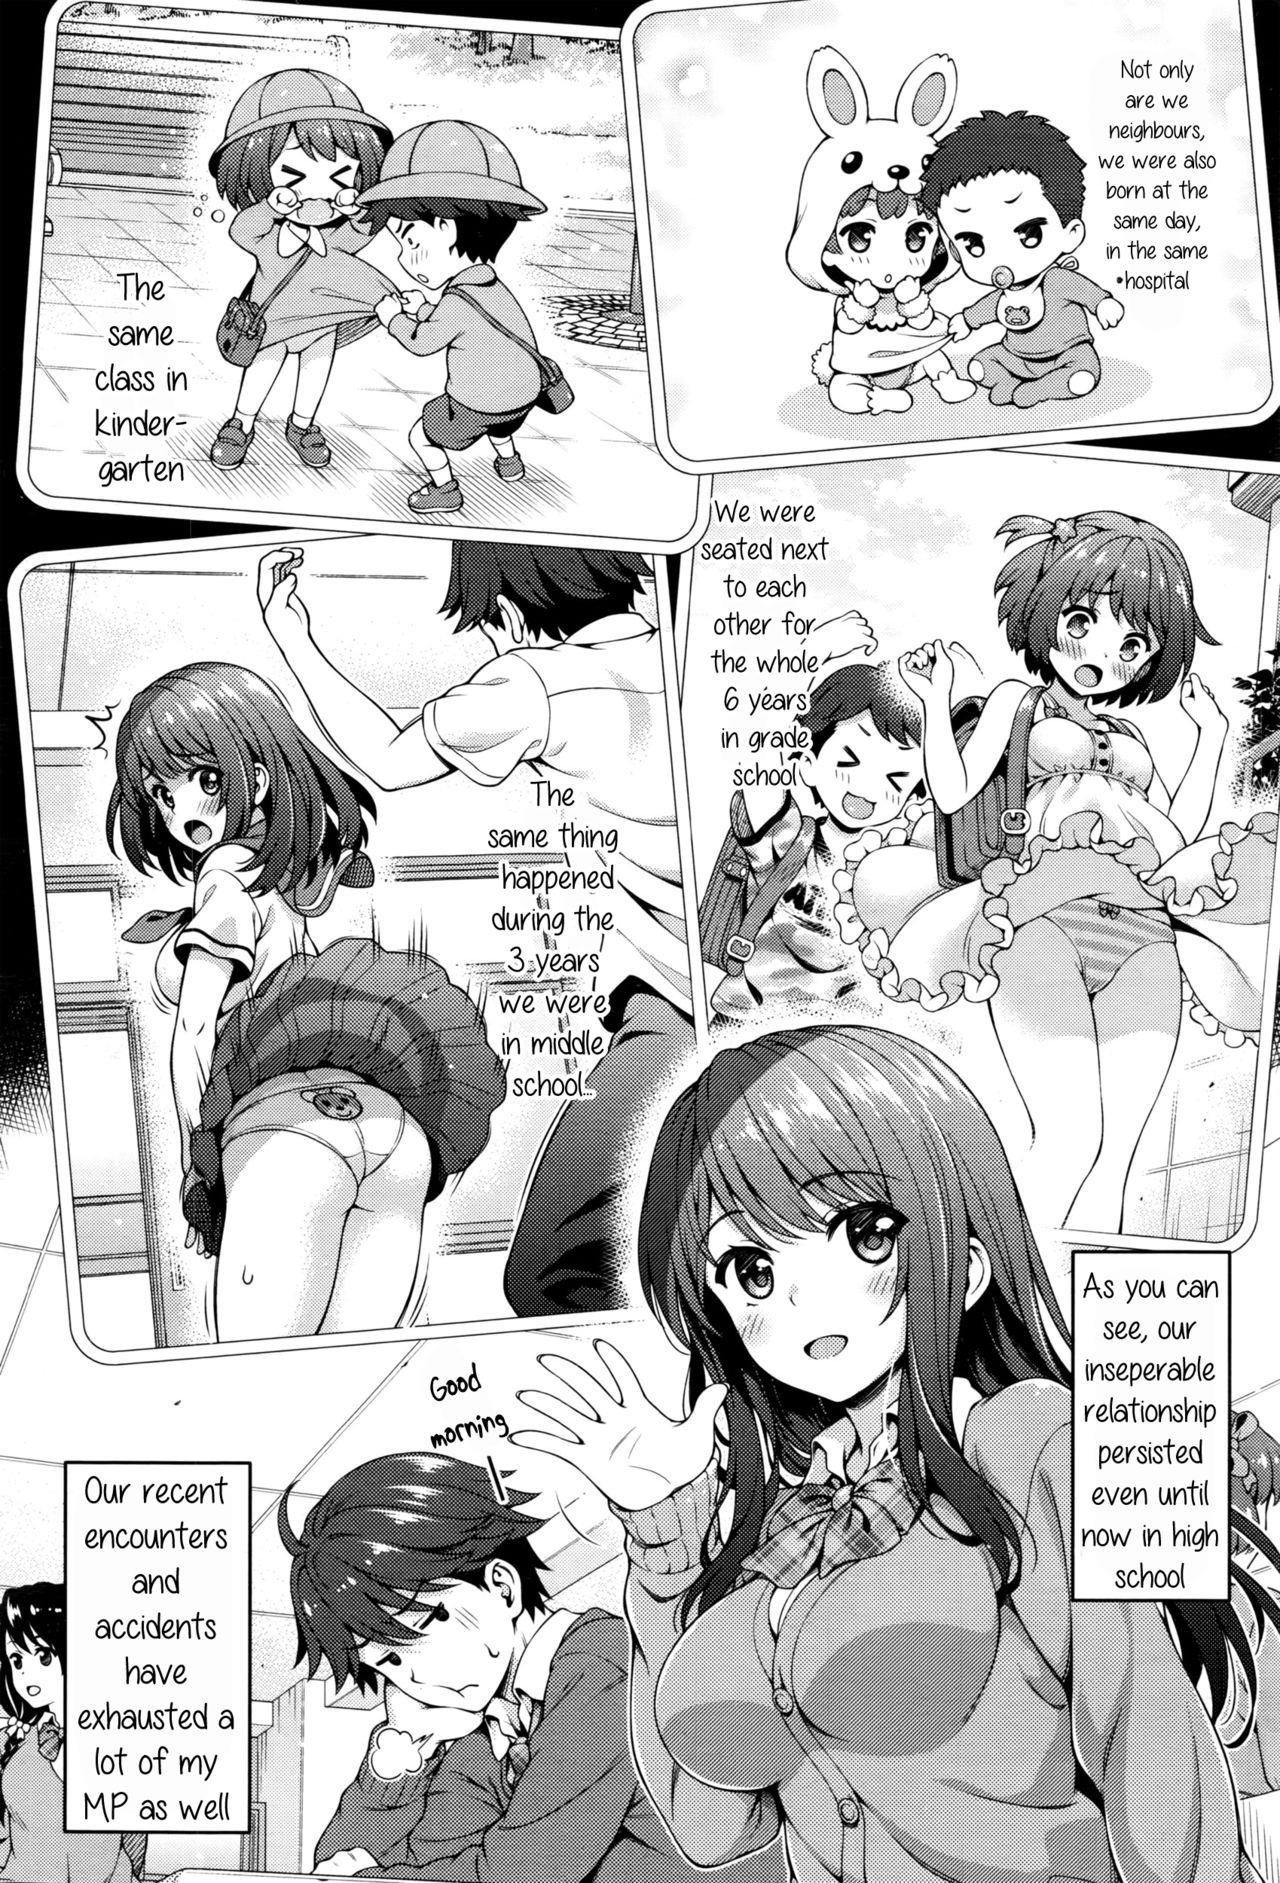 White Chick Akai Ito no Noroi | The Red String's Curse Titties - Page 4